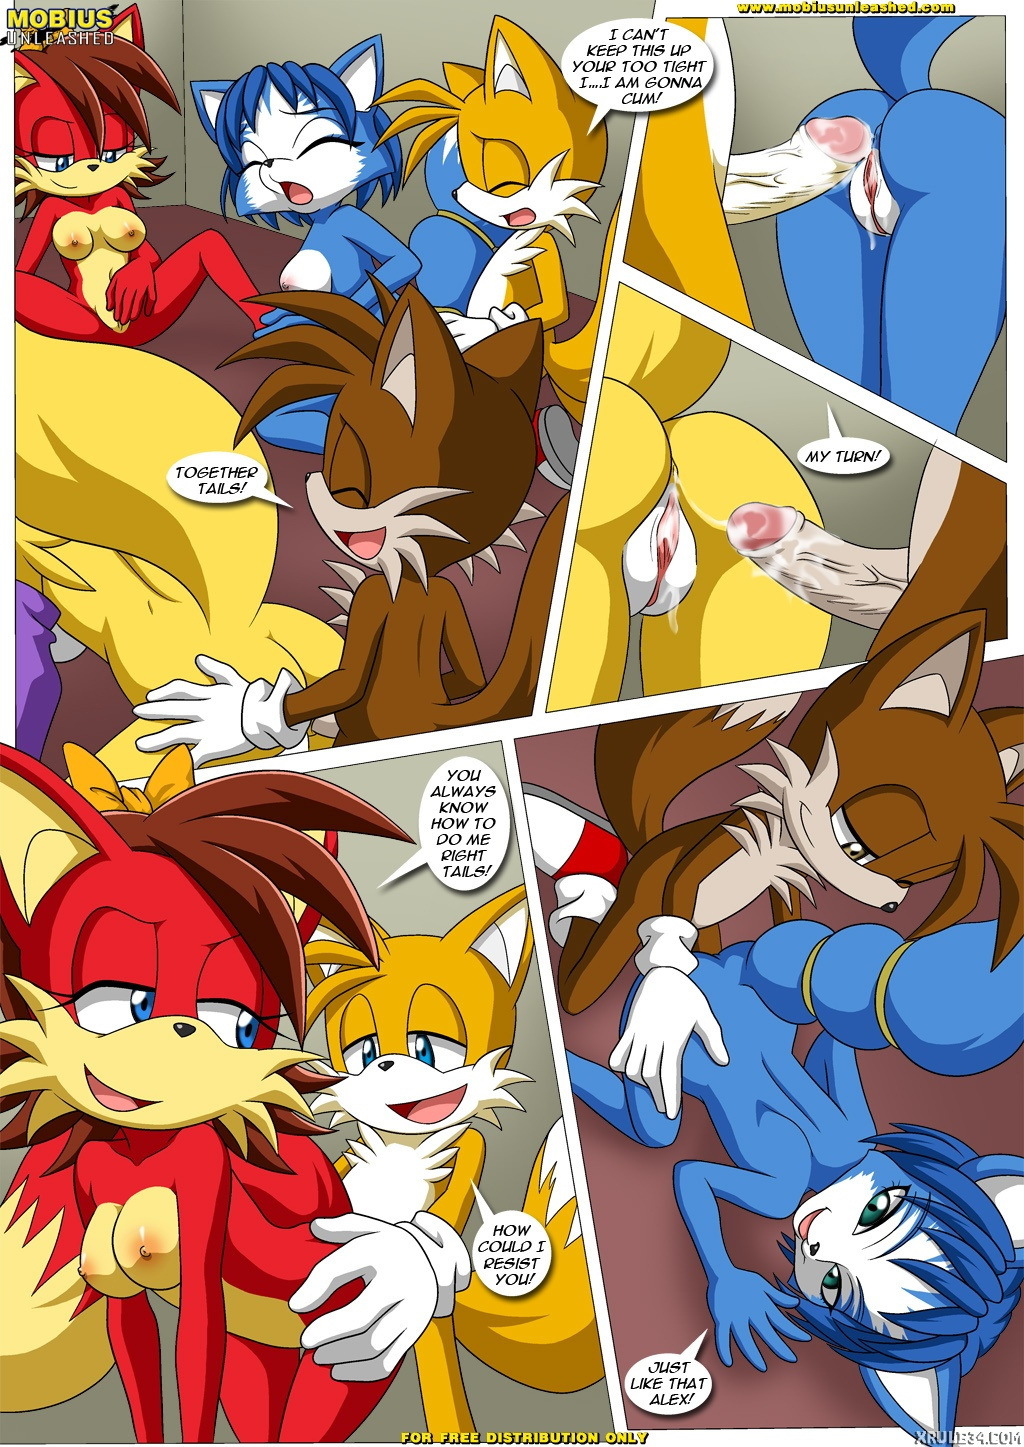 Foxxxes^2 - 2 Much Tail - Page 7